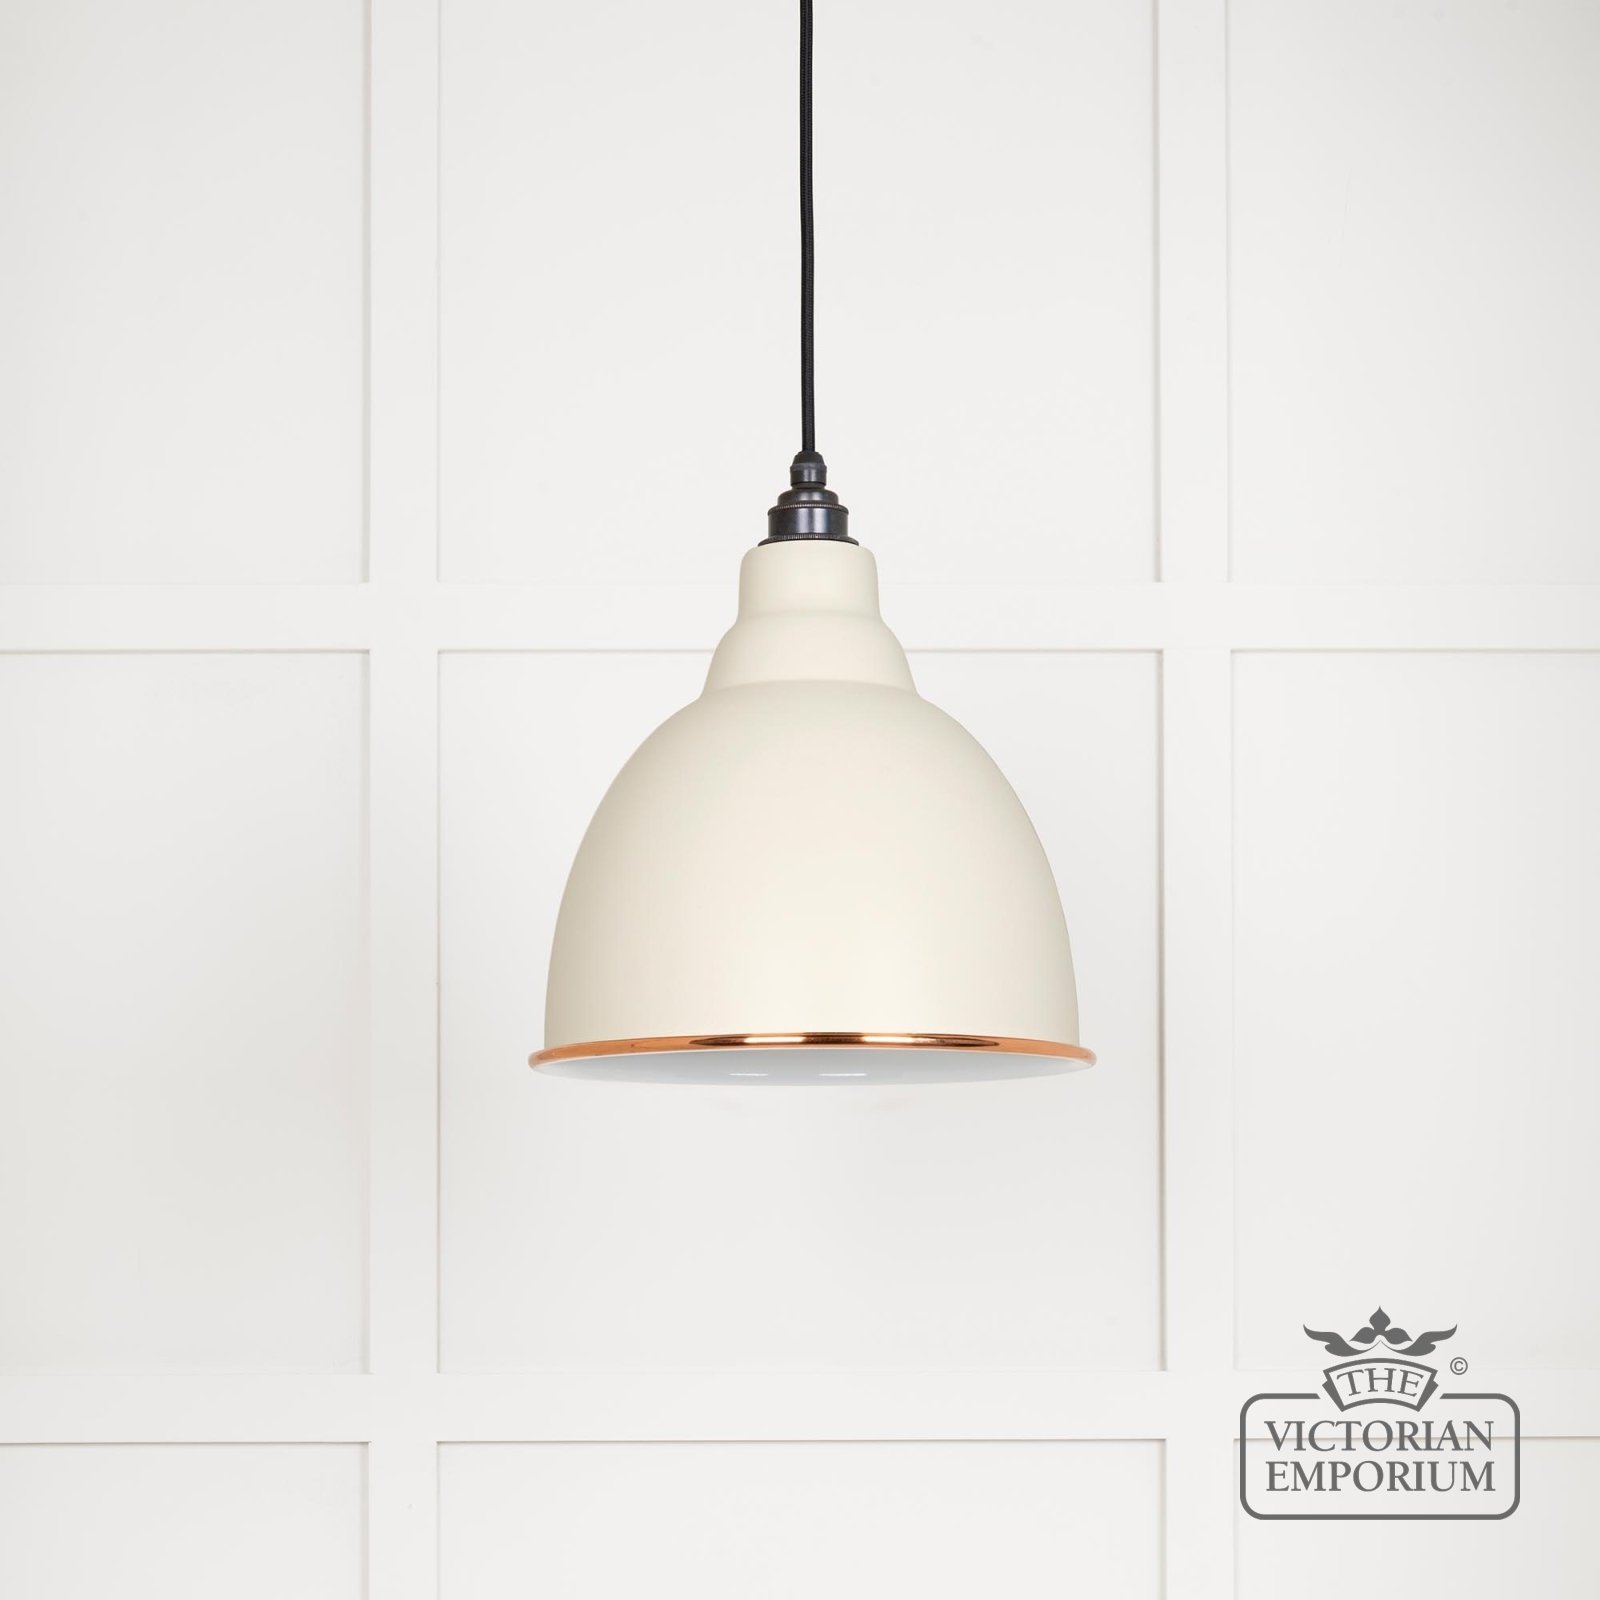 Brindle pendant light in Teasel with white gloss interior